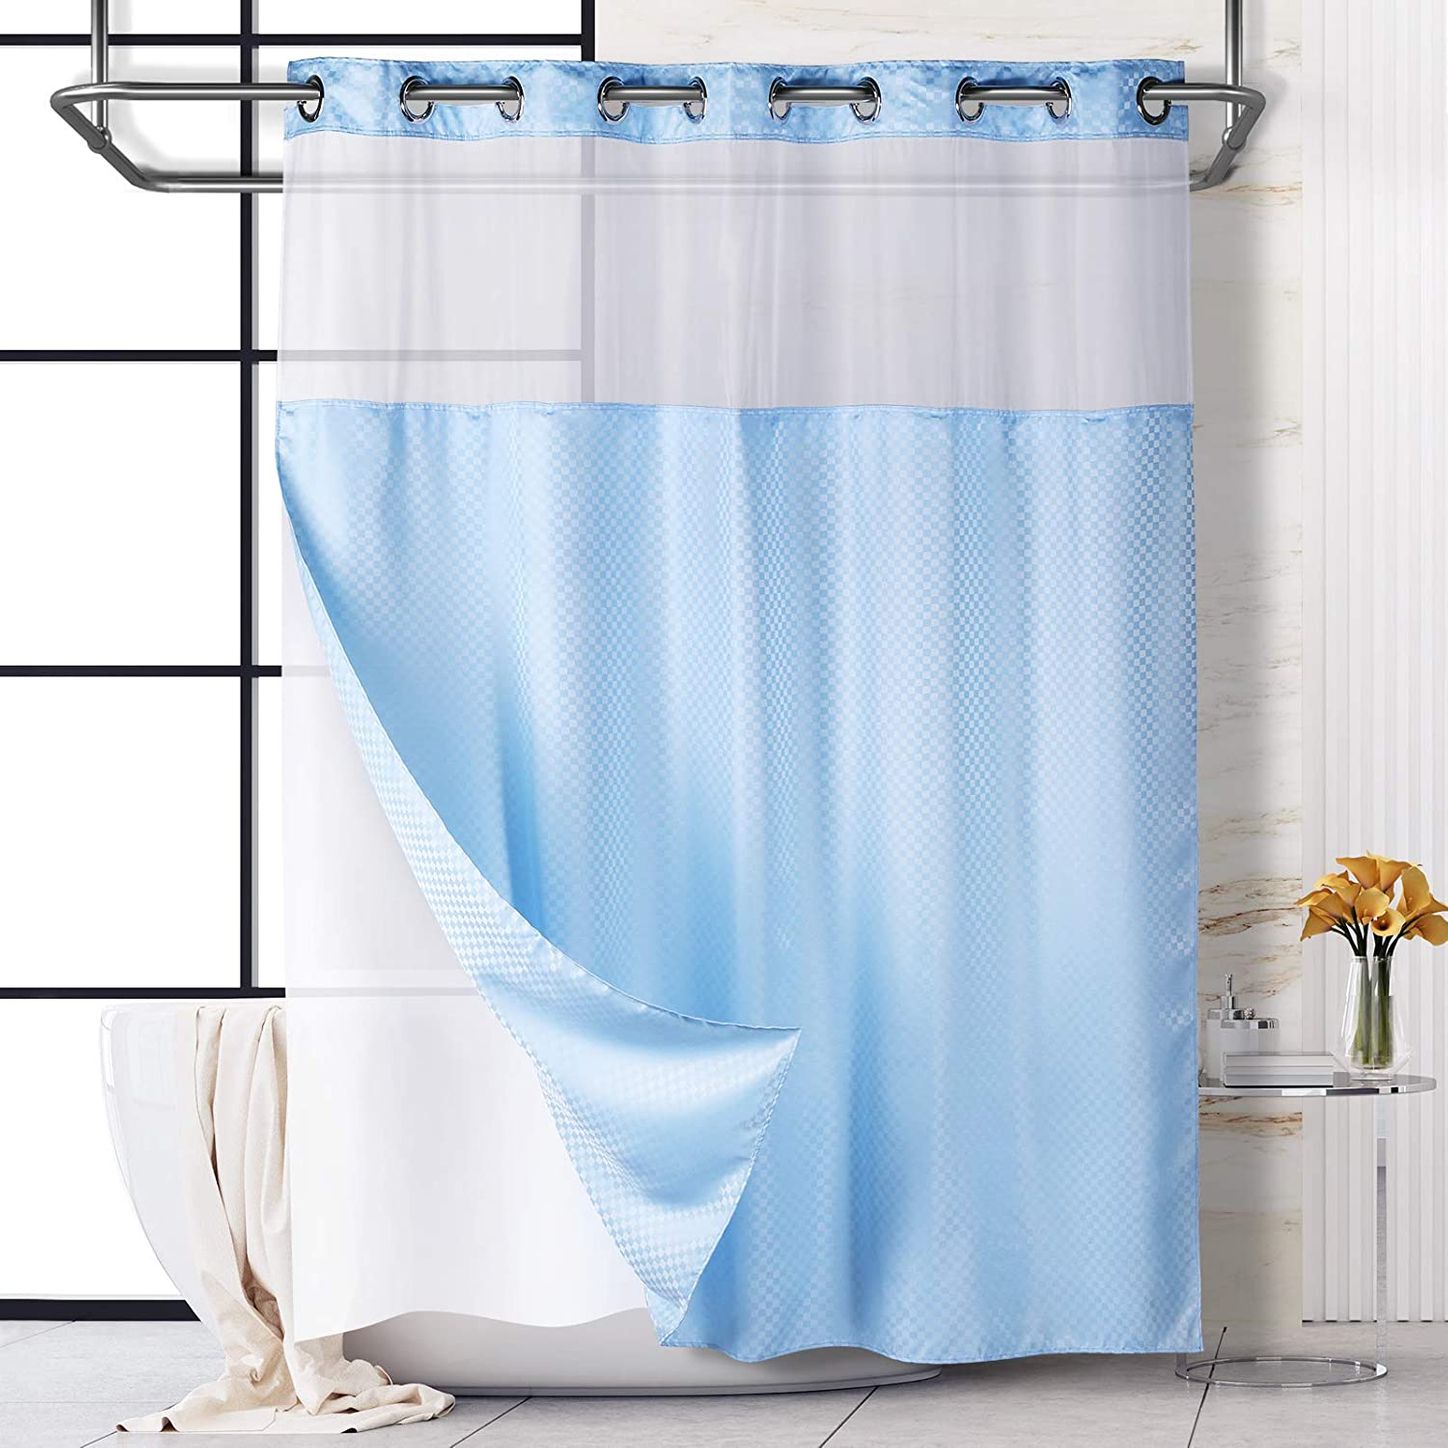 19 Best Shower Curtains 2022 The, What Are Plastic Shower Curtains Made Of